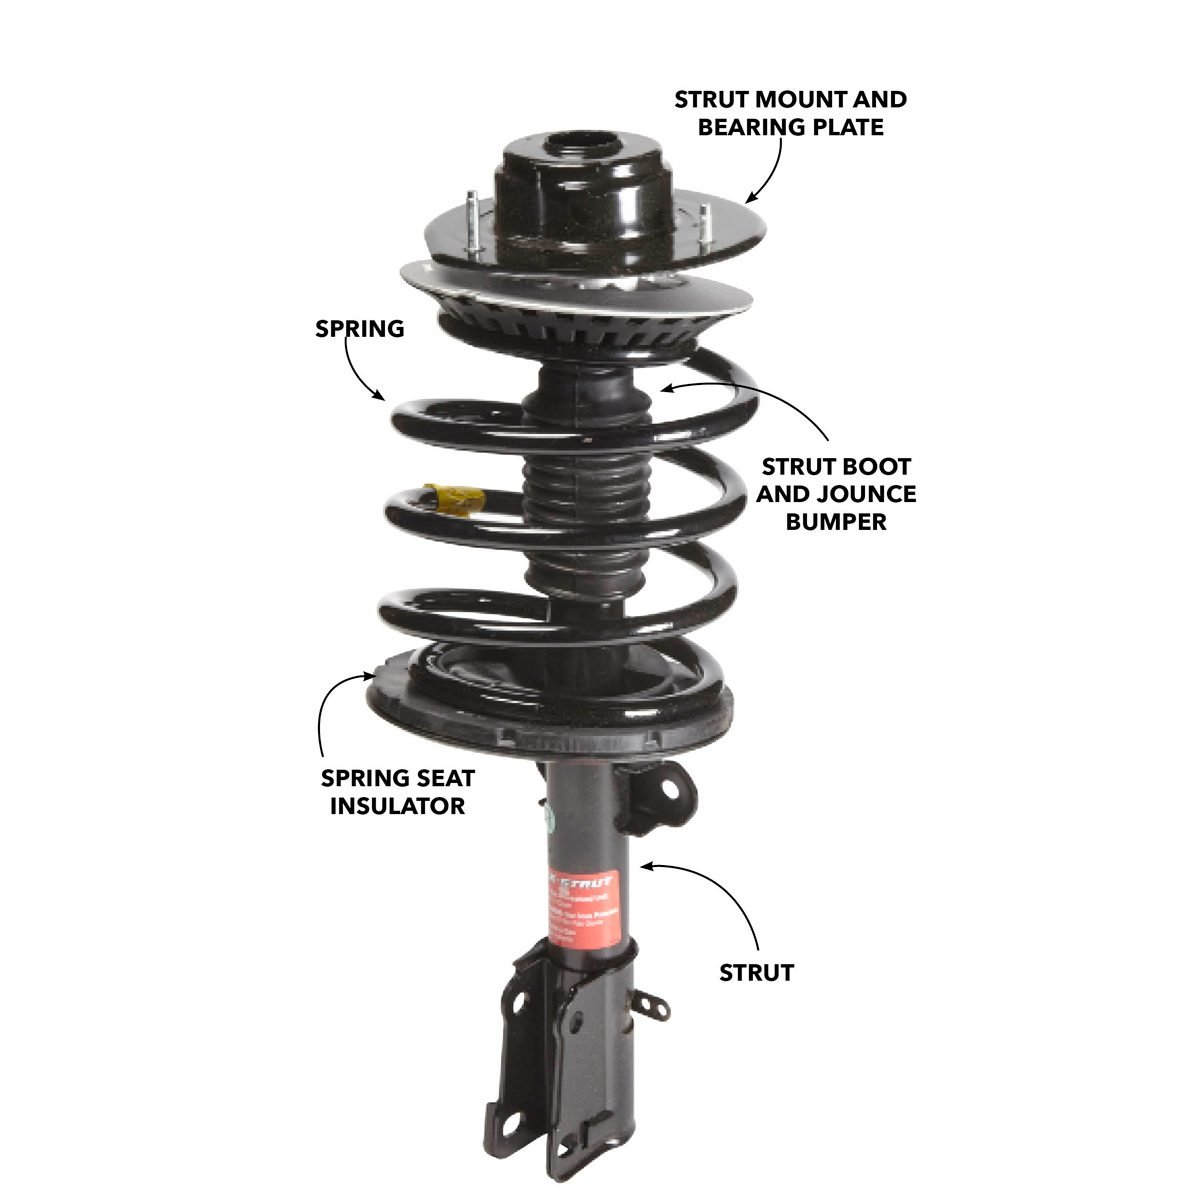 a-step-by-step-guide-on-struts-replacement-diy-family-handyman